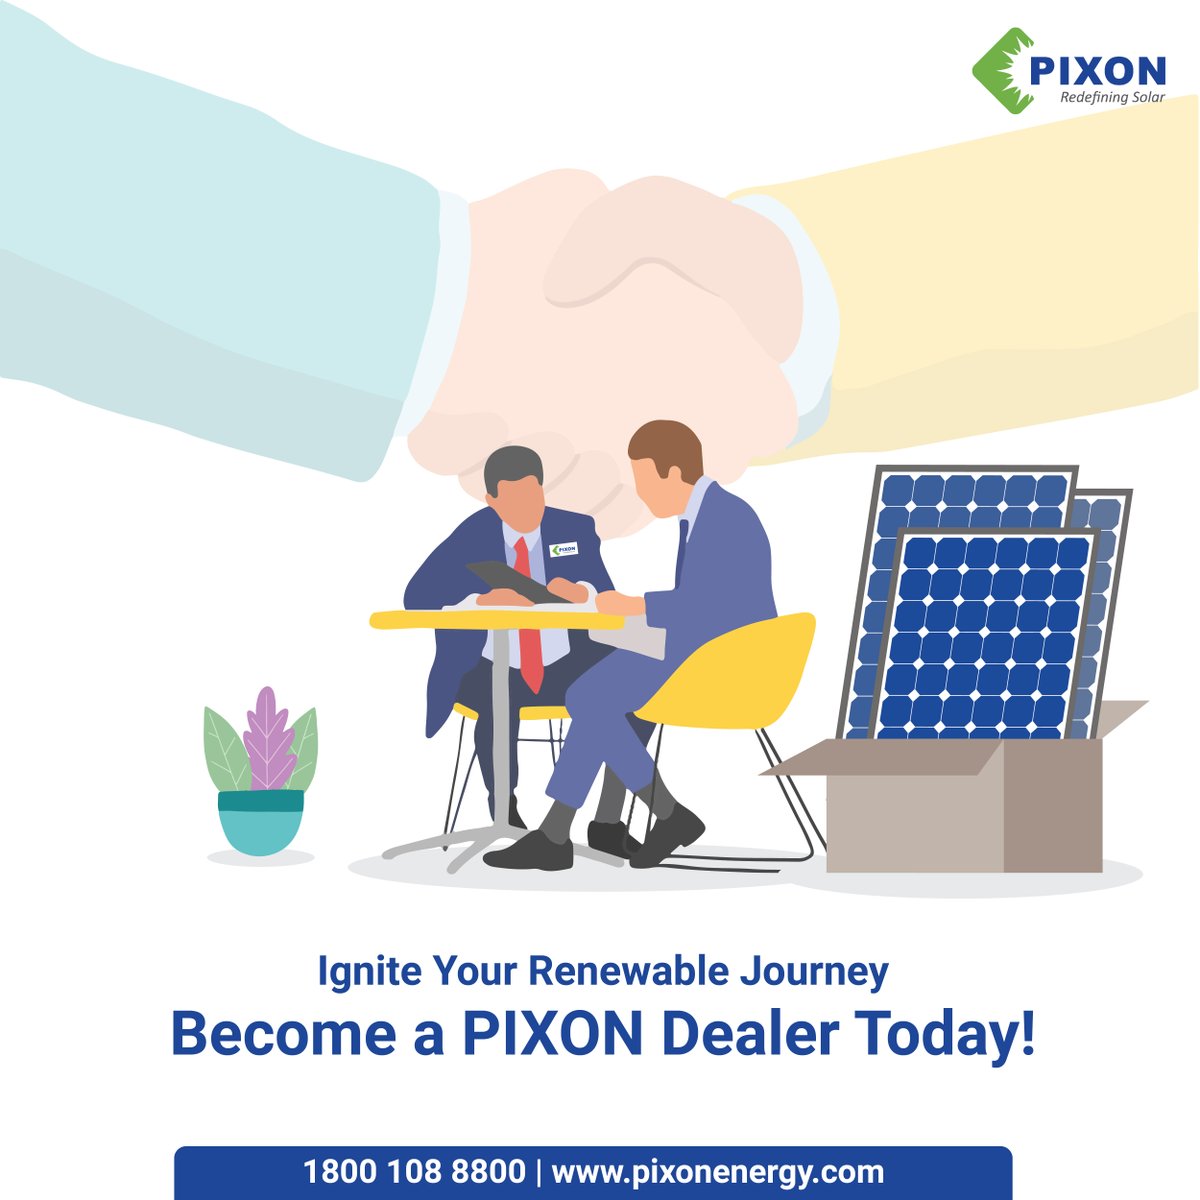 Elevate your business game with PIXON!
Join us as a #dealer and be at the forefront of technology.

Apply Now. 

#pixonsolar #solarpower #renewableenergy #modulemanufacturer #solarmodules #solarpanels #solarenergy #partner #collaboration